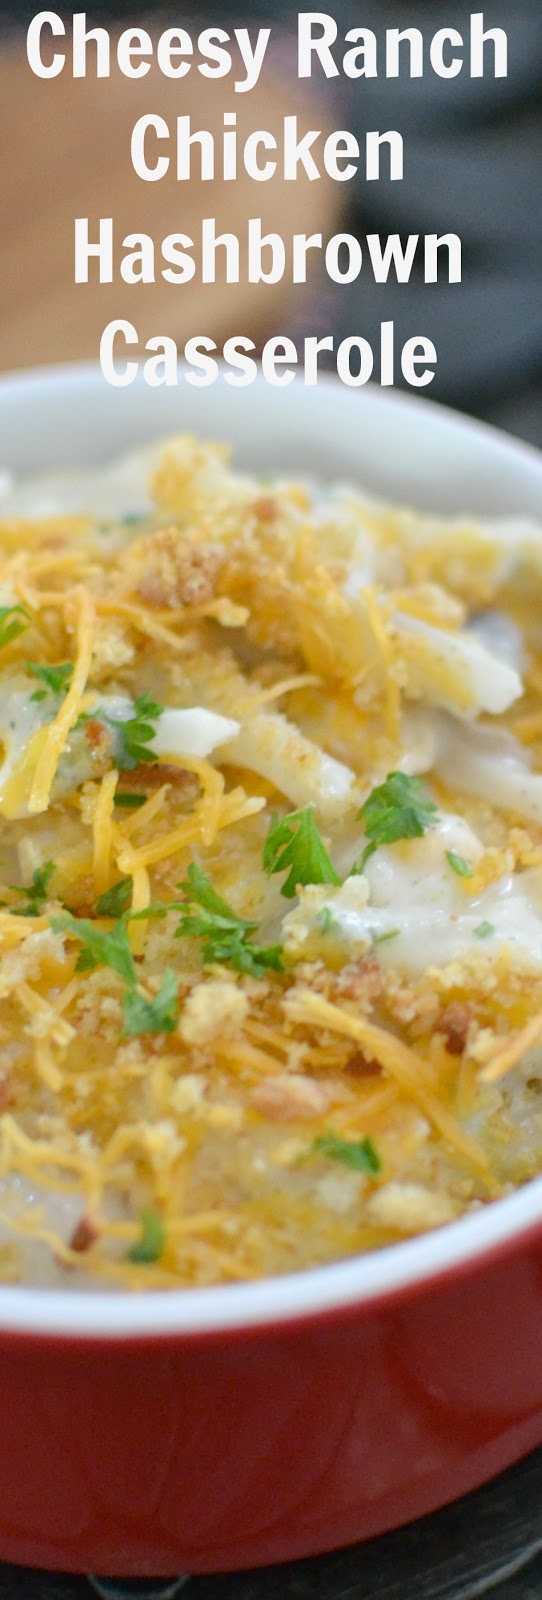 A pure comfort food casserole that the whole family will love! Budget friendly and the leftovers are great for lunch! This will be a new favorite! Cheesy Ranch Chicken Hashbrown Casserole Recipe from Hot Eats and Cool Reads